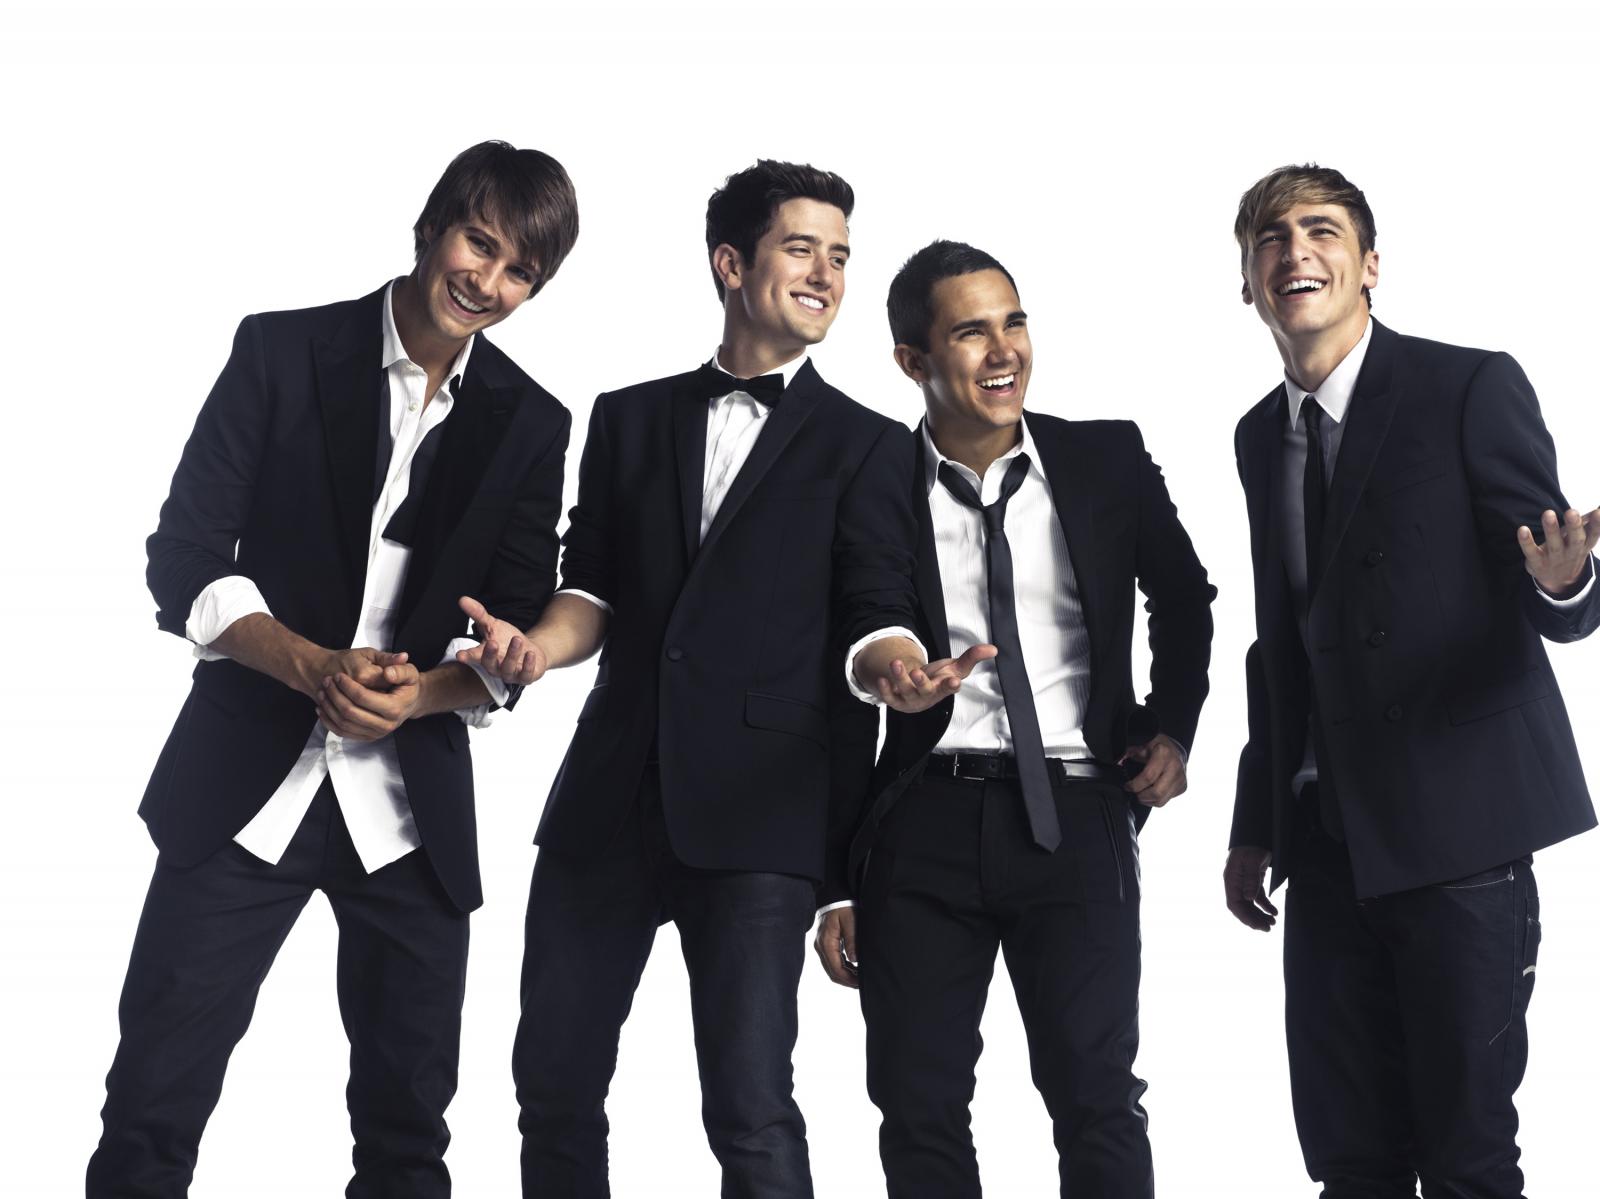 big time rush wallpaper,social group,suit,white collar worker,formal wear,team